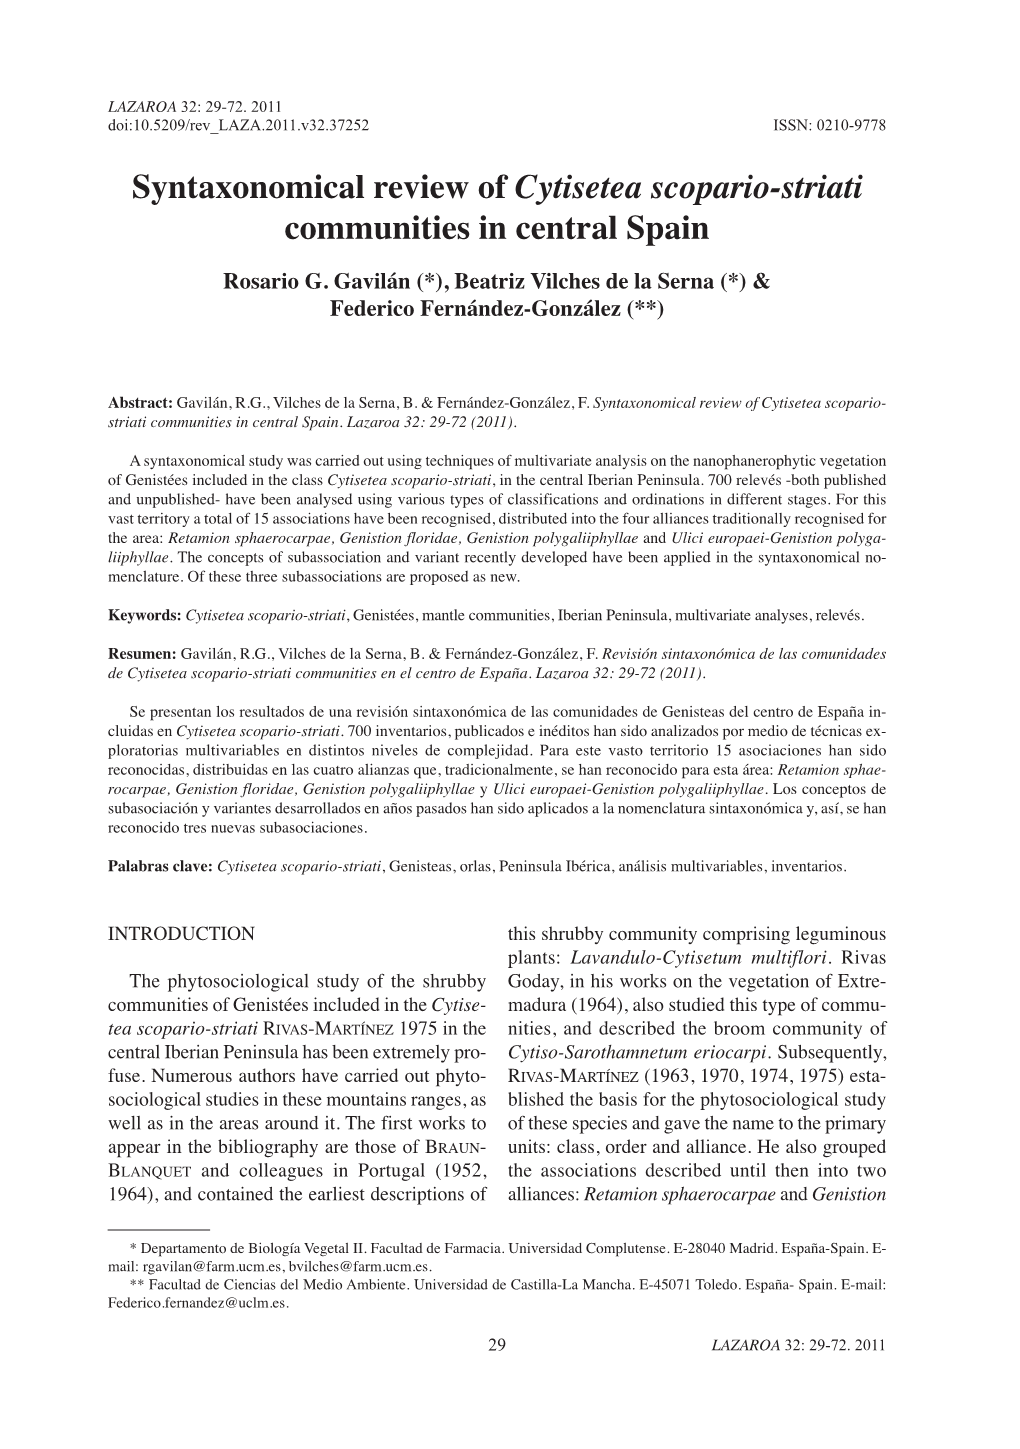 Syntaxonomical Review of Cytisetea Scopario-Striati Communities in Central Spain